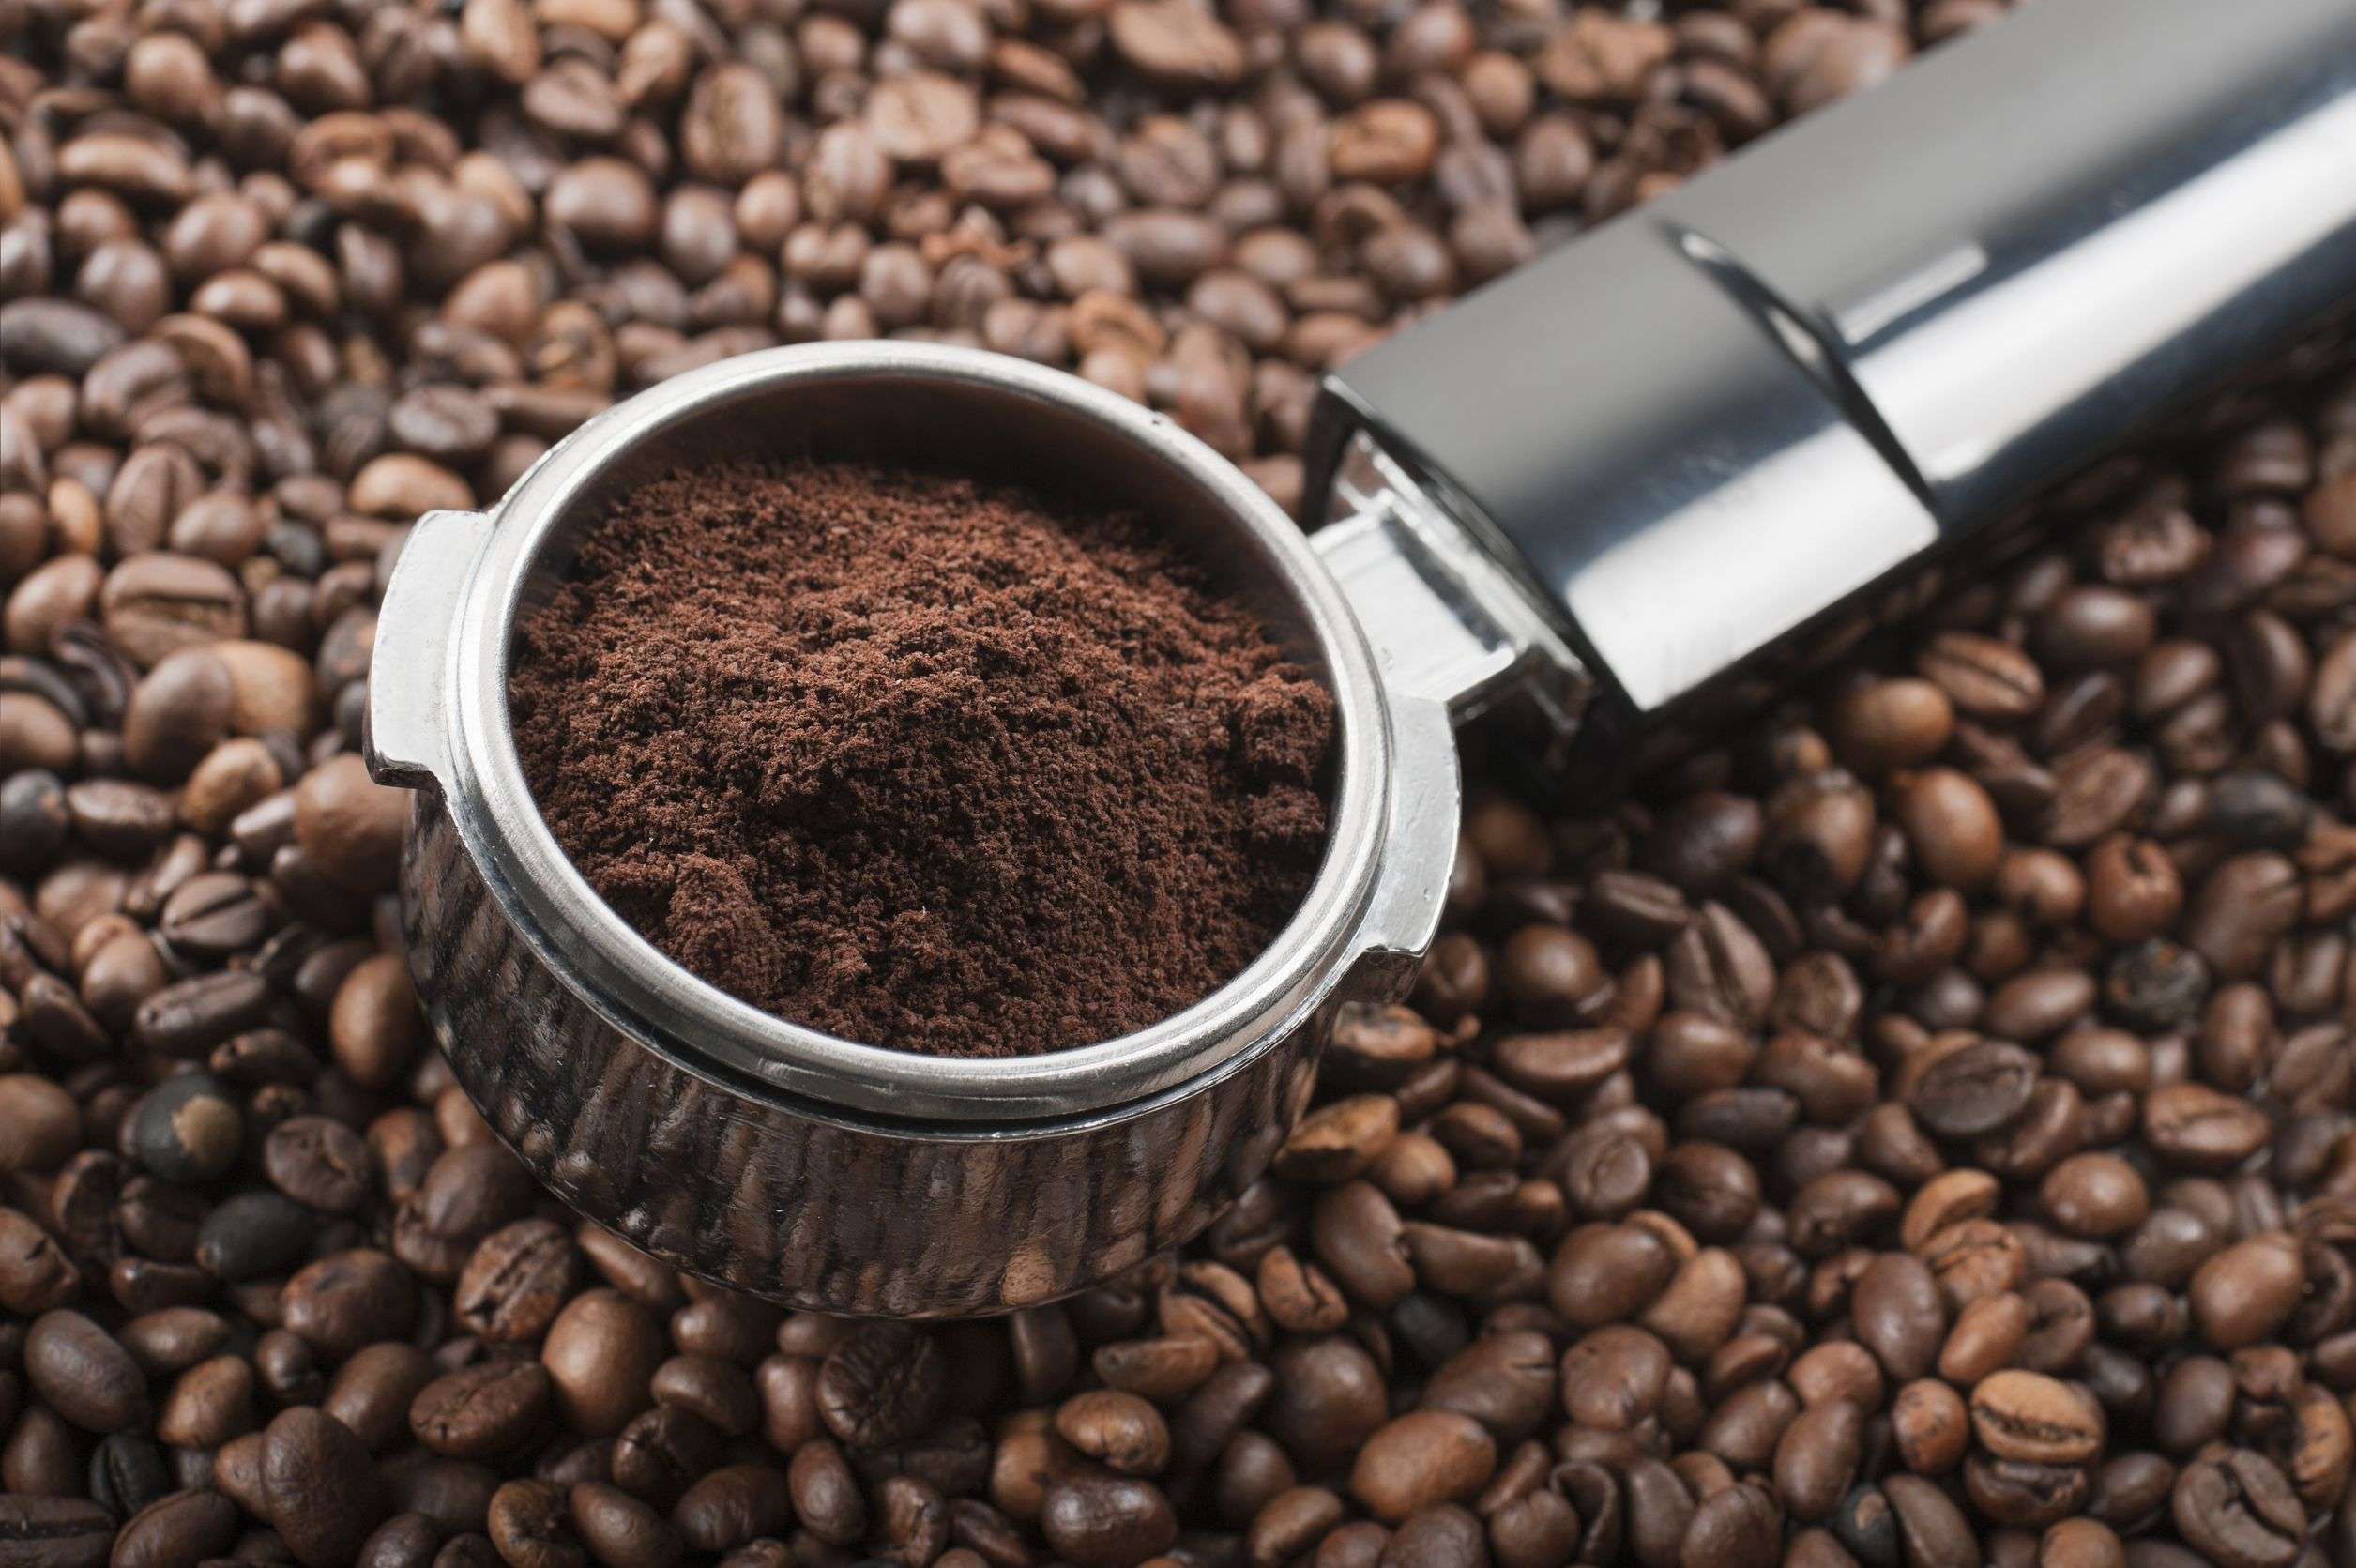 10 Creative Ways to Use Old Coffee Grounds